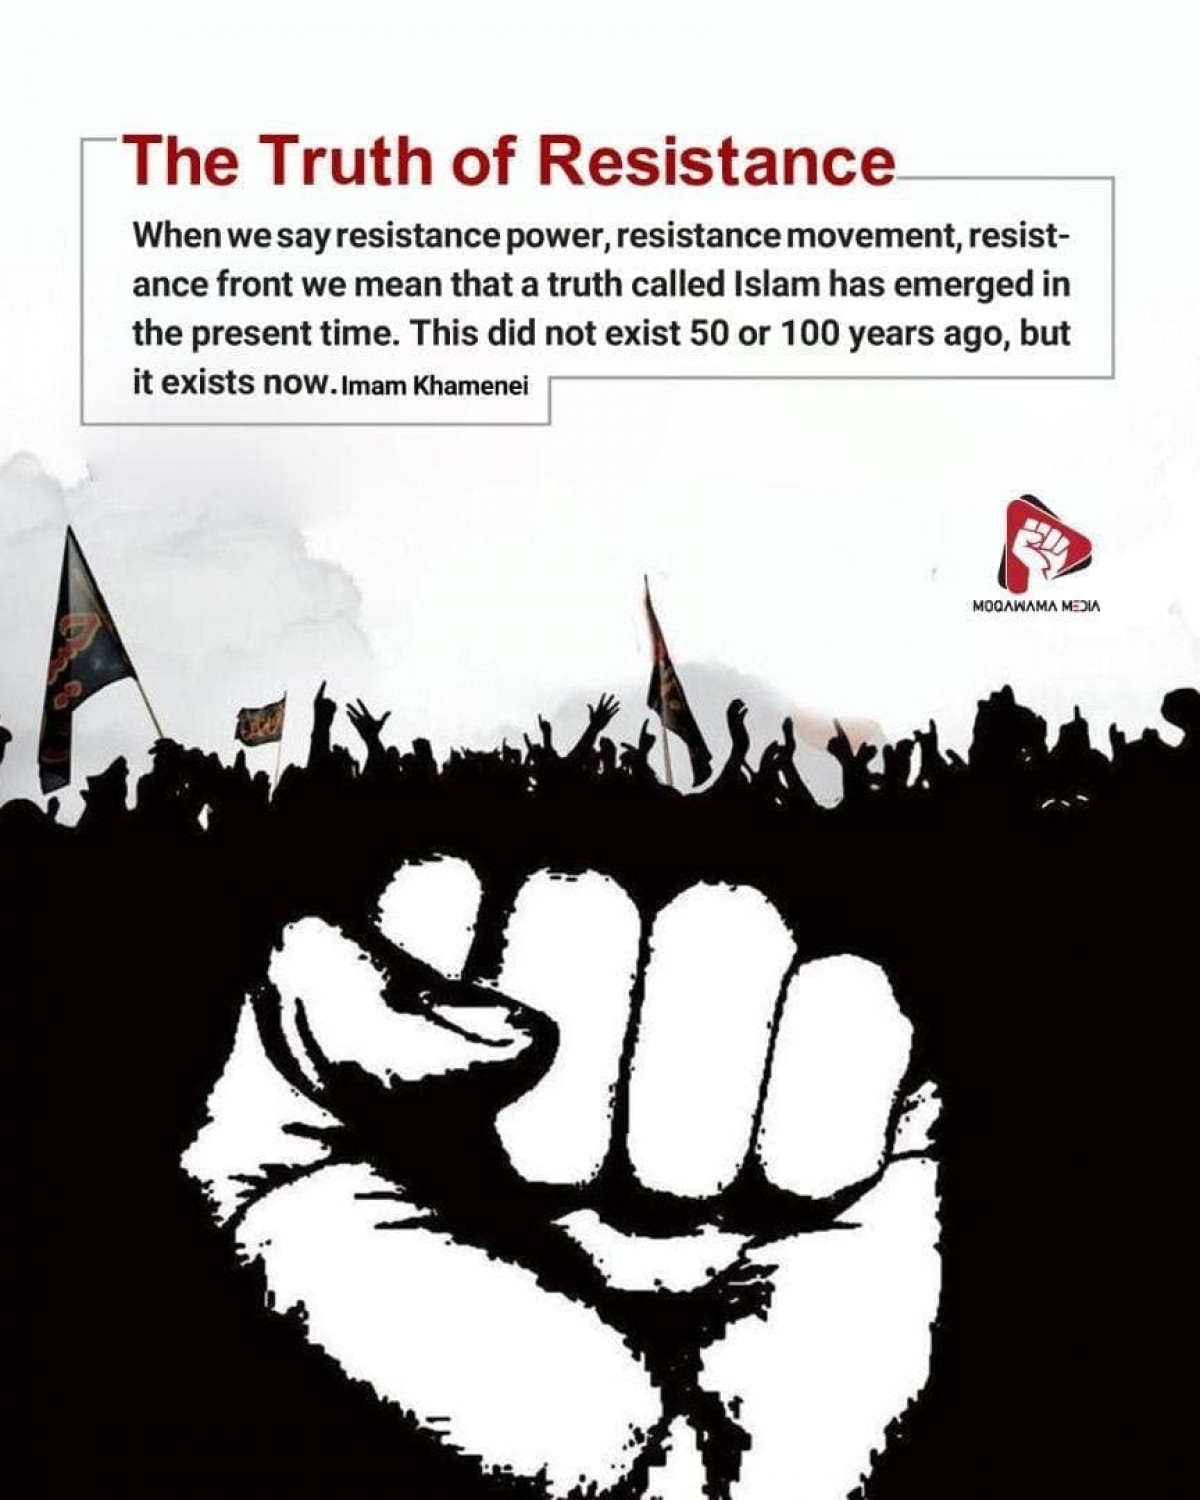 The Truth of Resistance